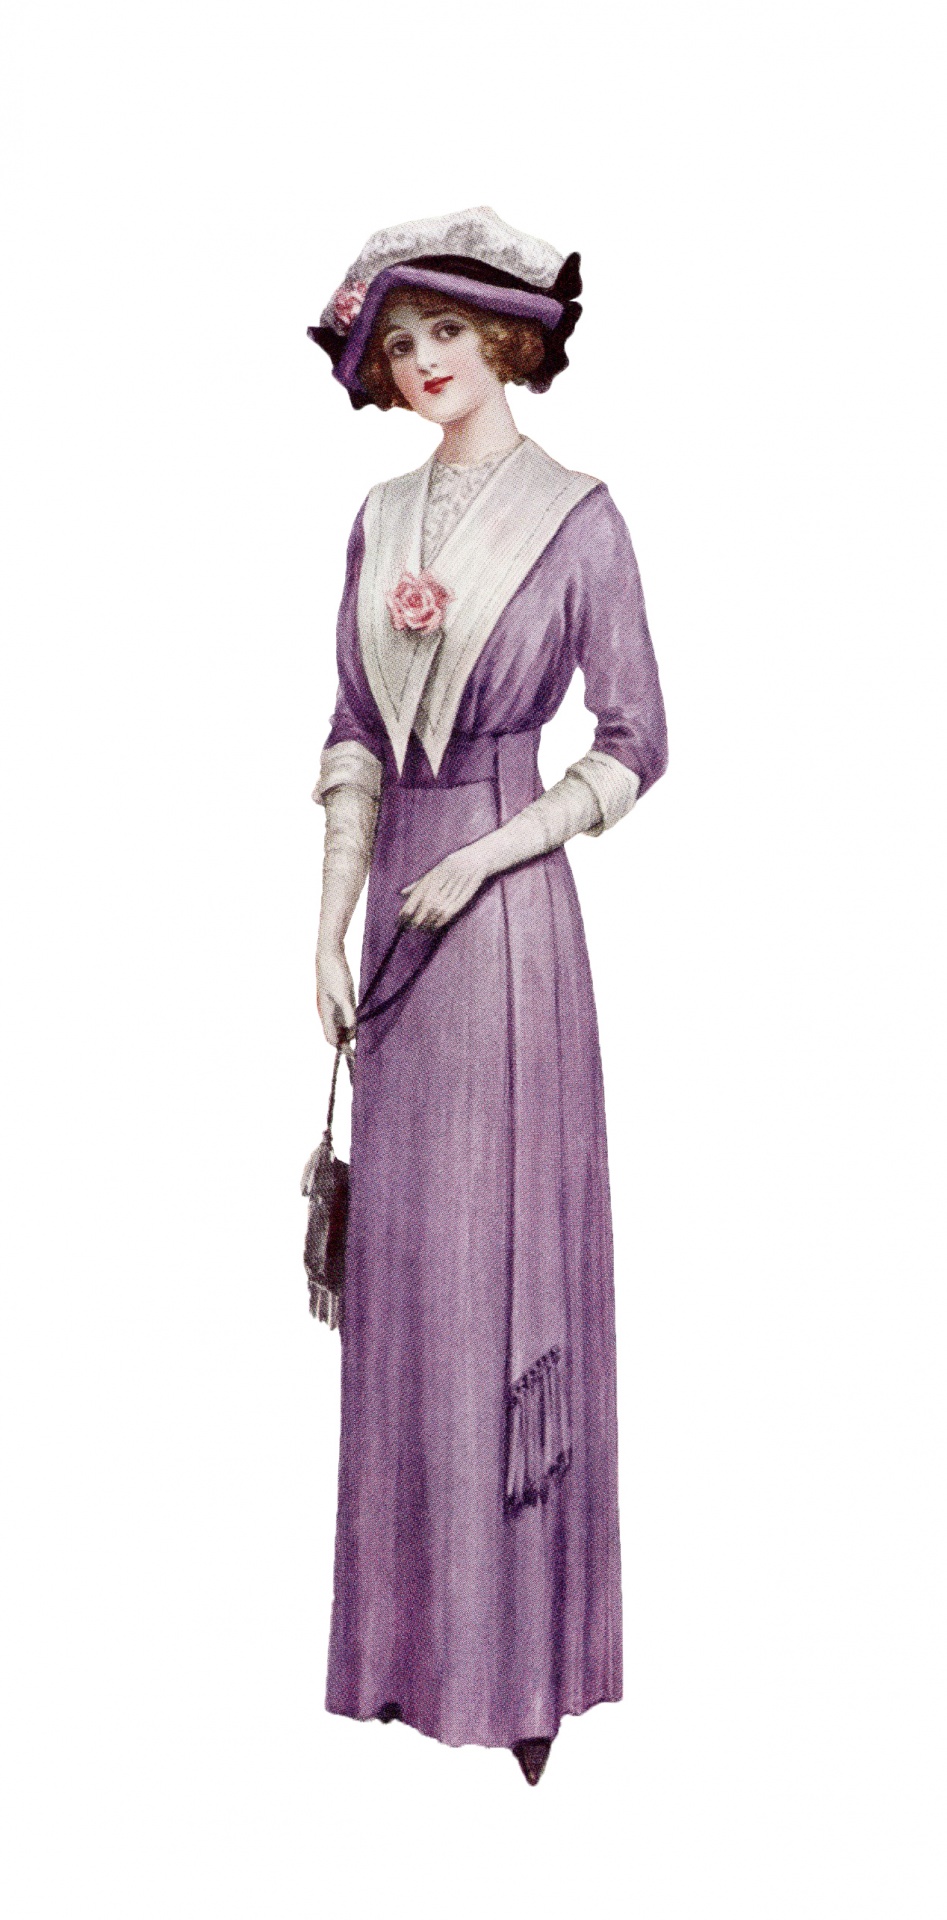 Very pretty victorian young lady wearing a purple dress on white background